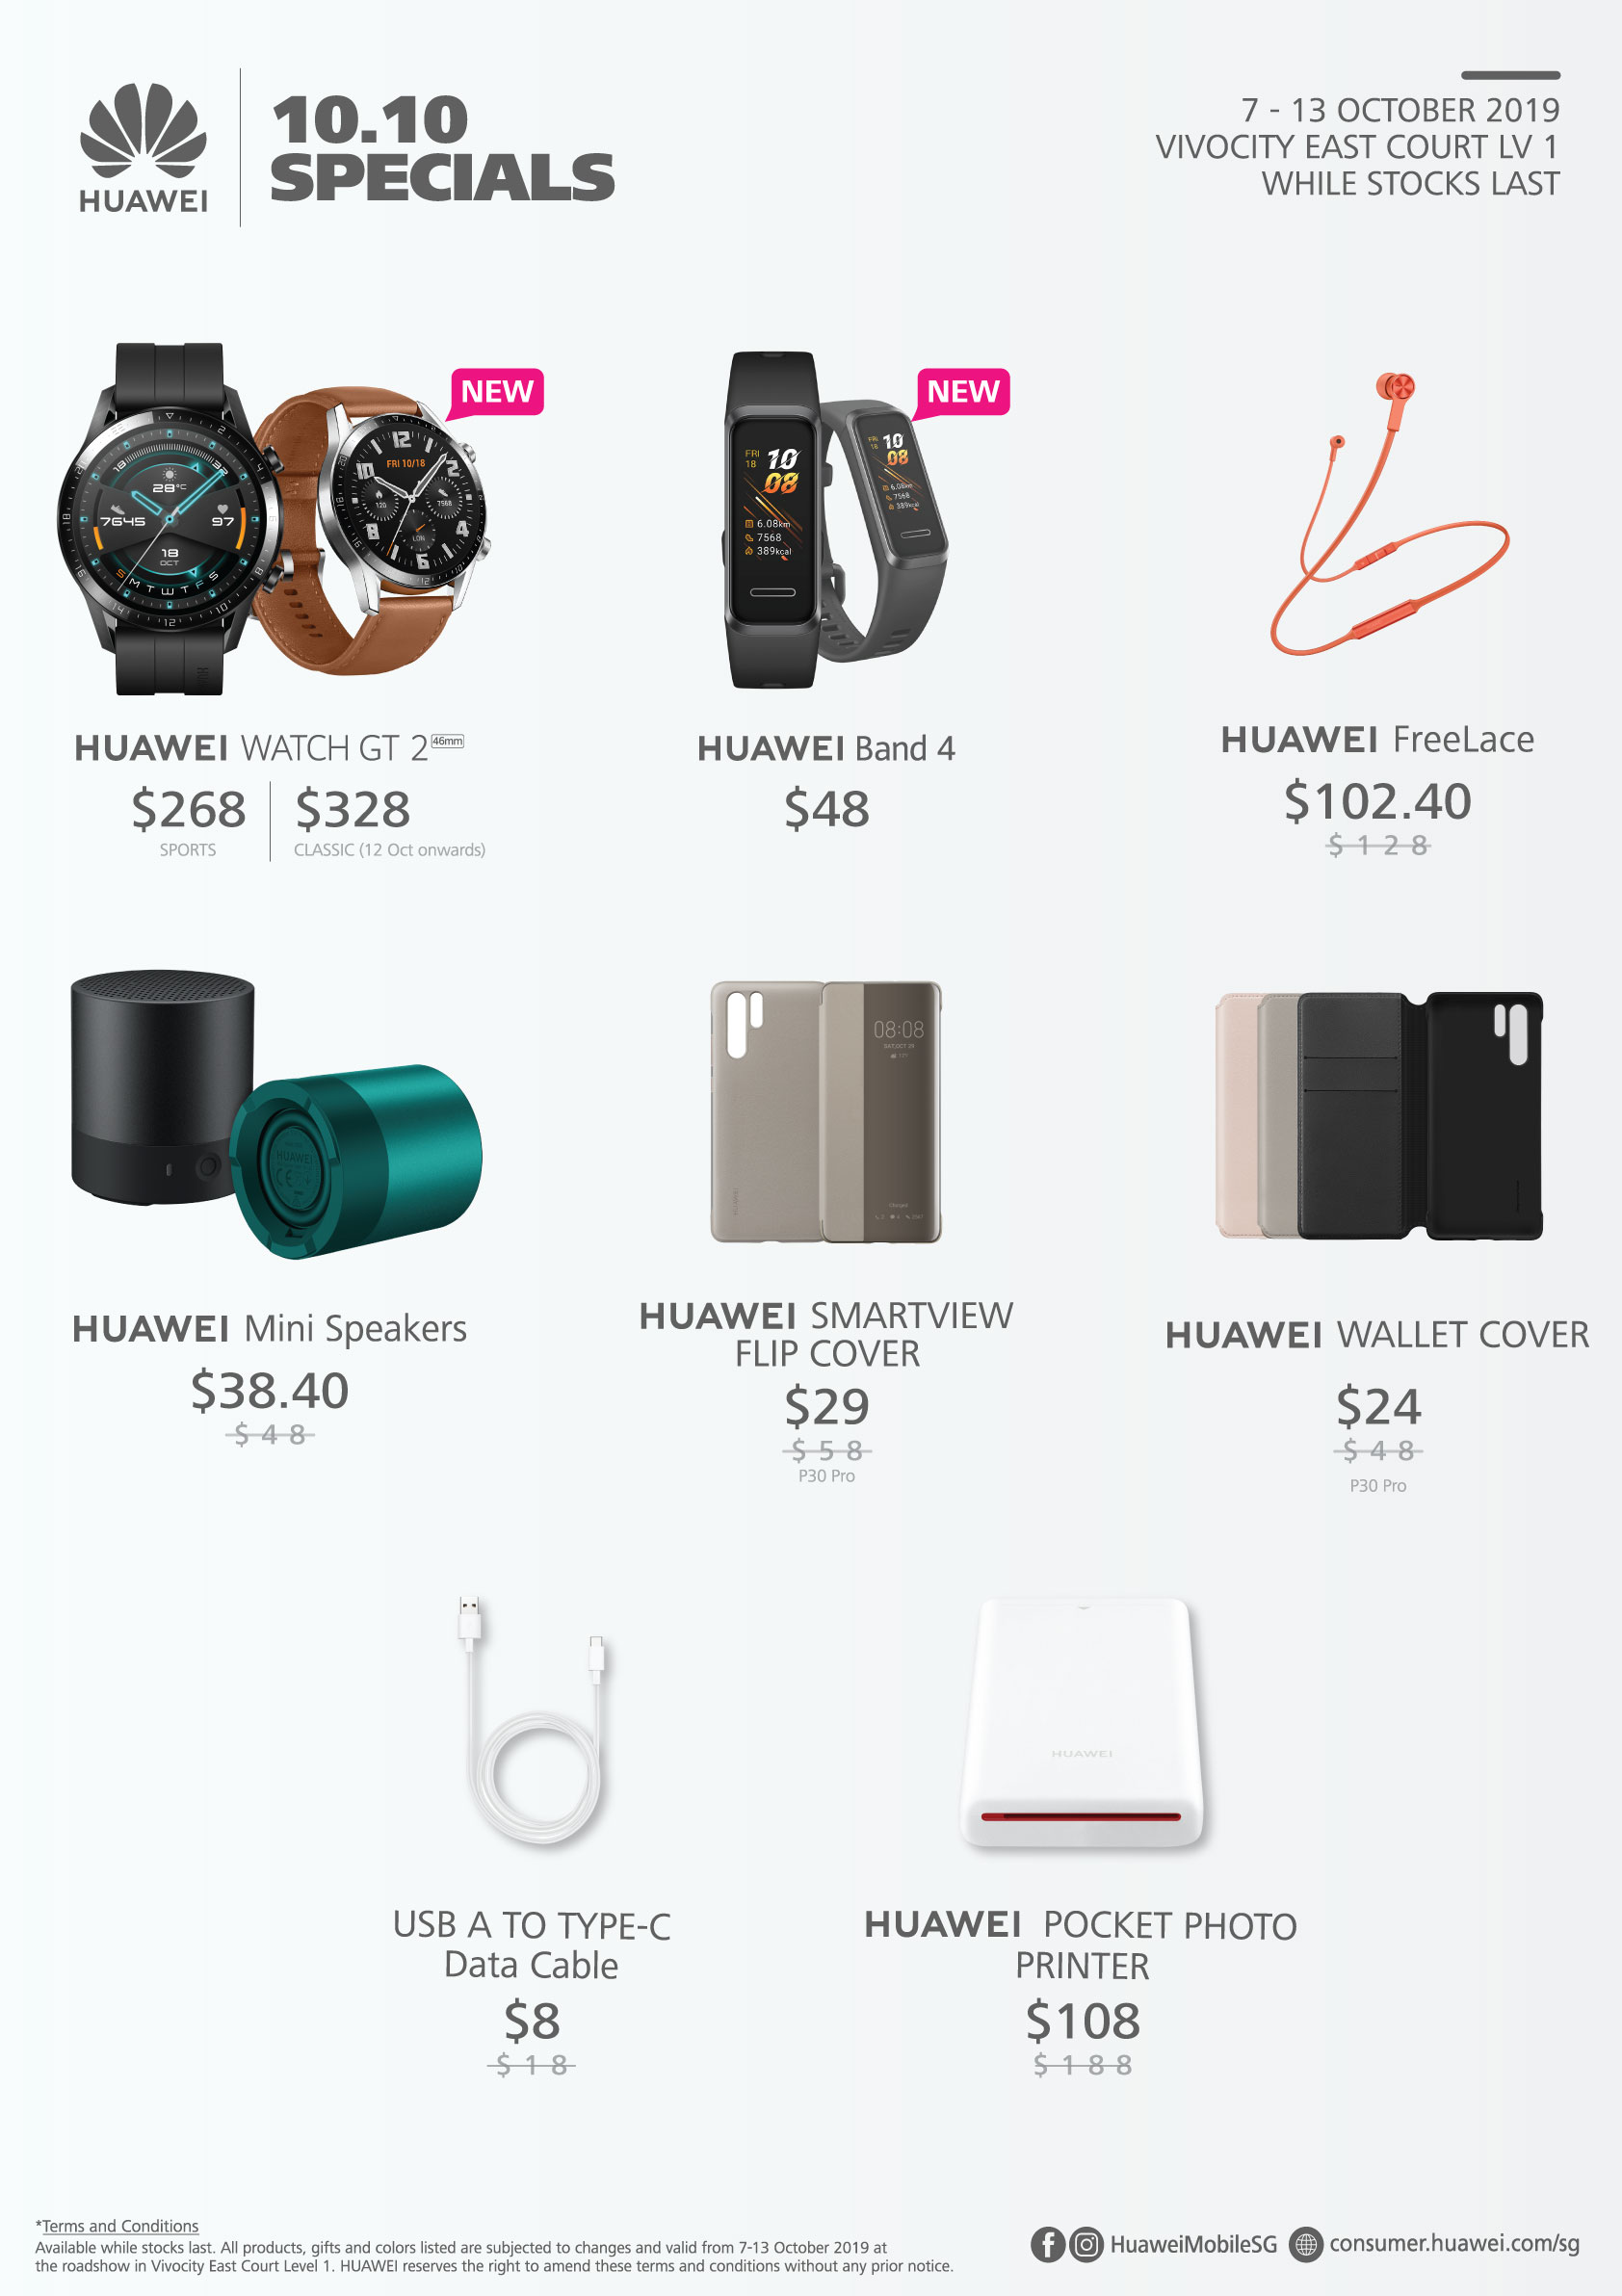 Get up to 50% off HUAWEI products and receive exclusive gift bundles at VivoCity this 10 October – Attack! - Alvinology